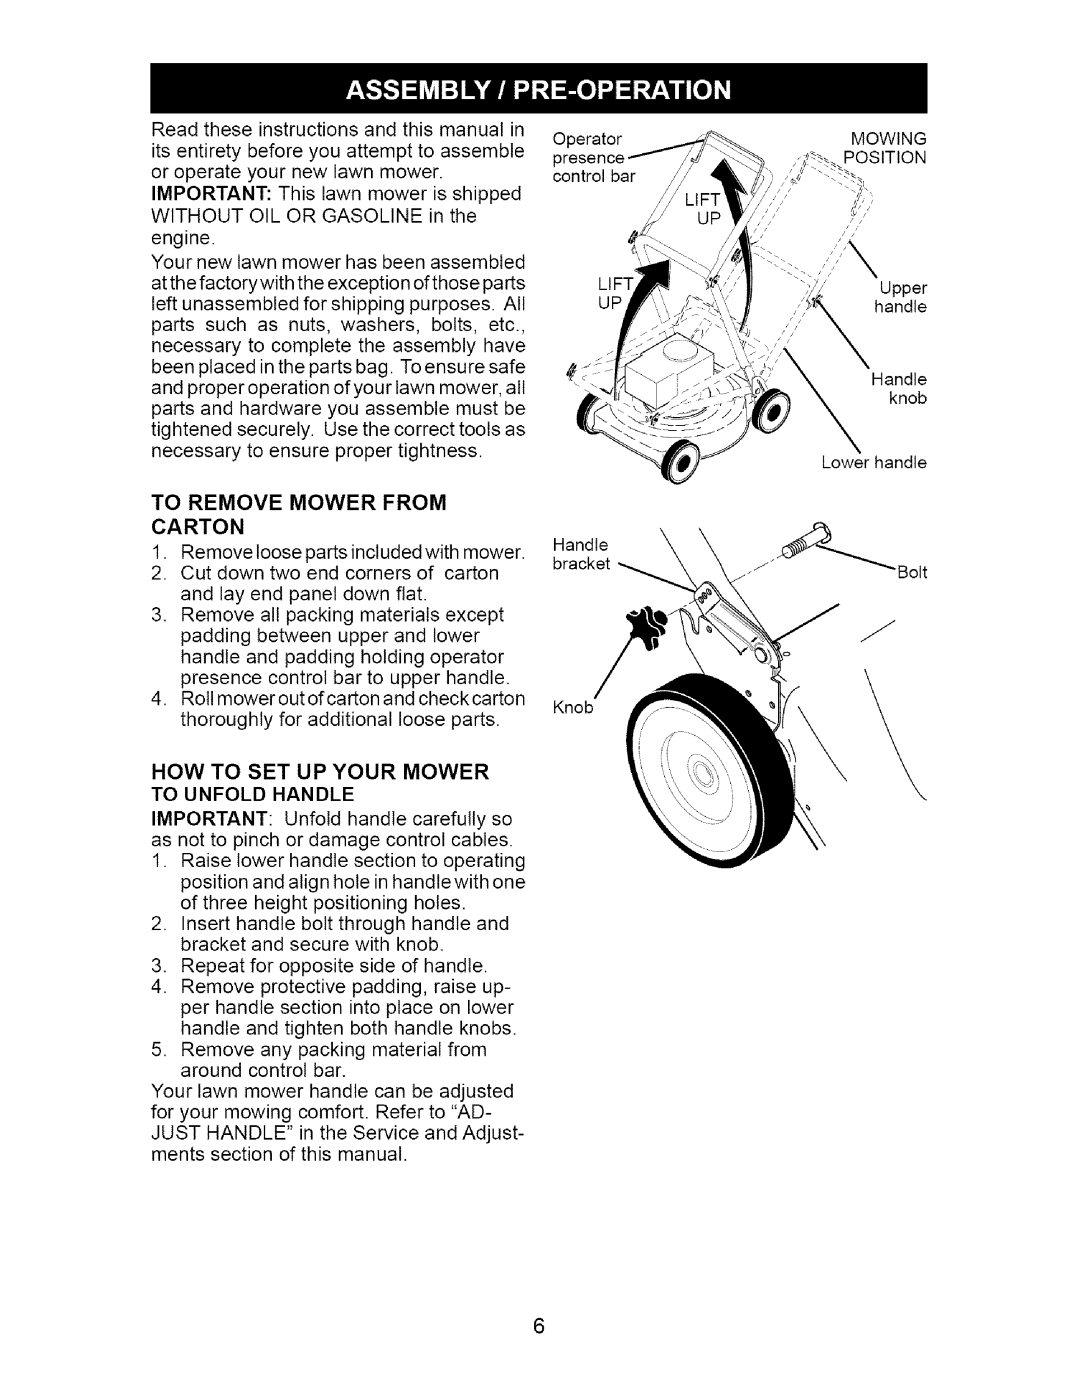 Craftsman 917.370741 owner manual From, Carton, How To Set Up Your Mower To Unfold Handle 